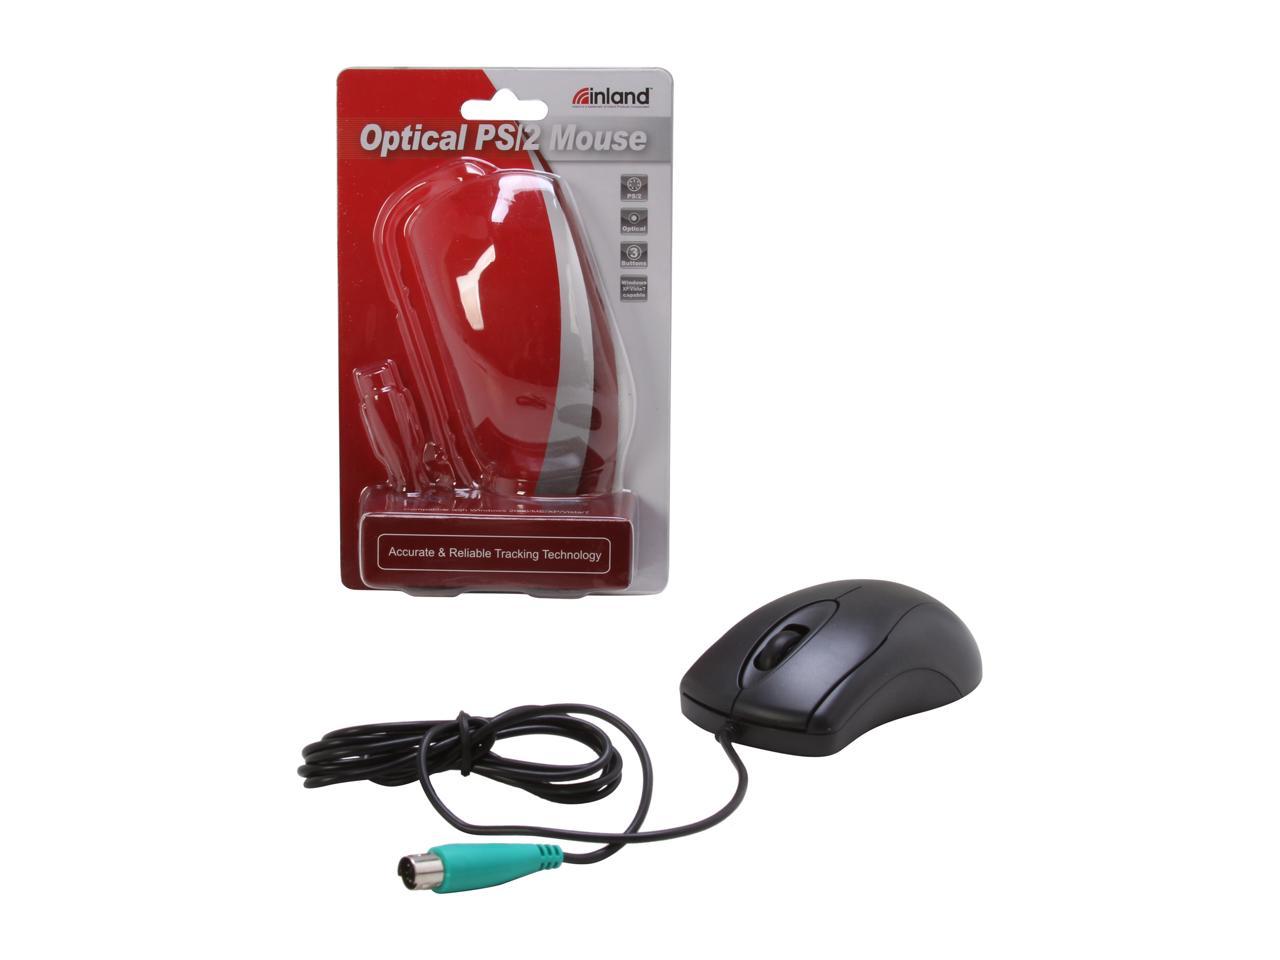 ihome 3 button usb optical mouse driver